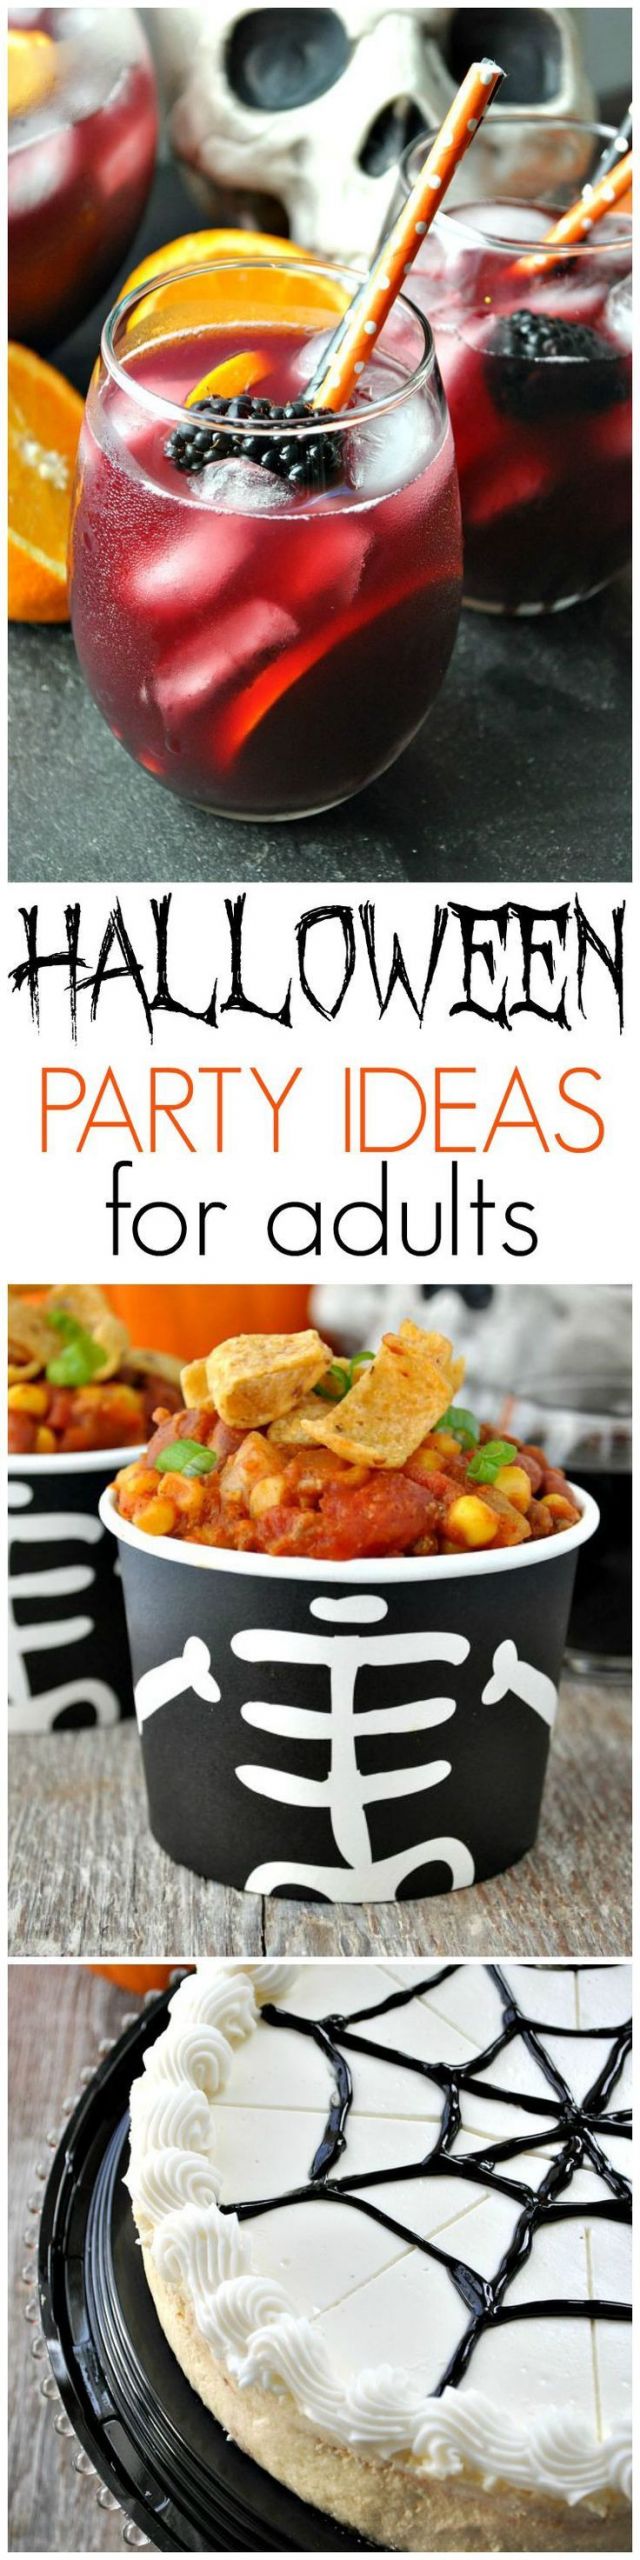 Easy Halloween Party Ideas
 27 best Halloween Ve ables images on Pinterest